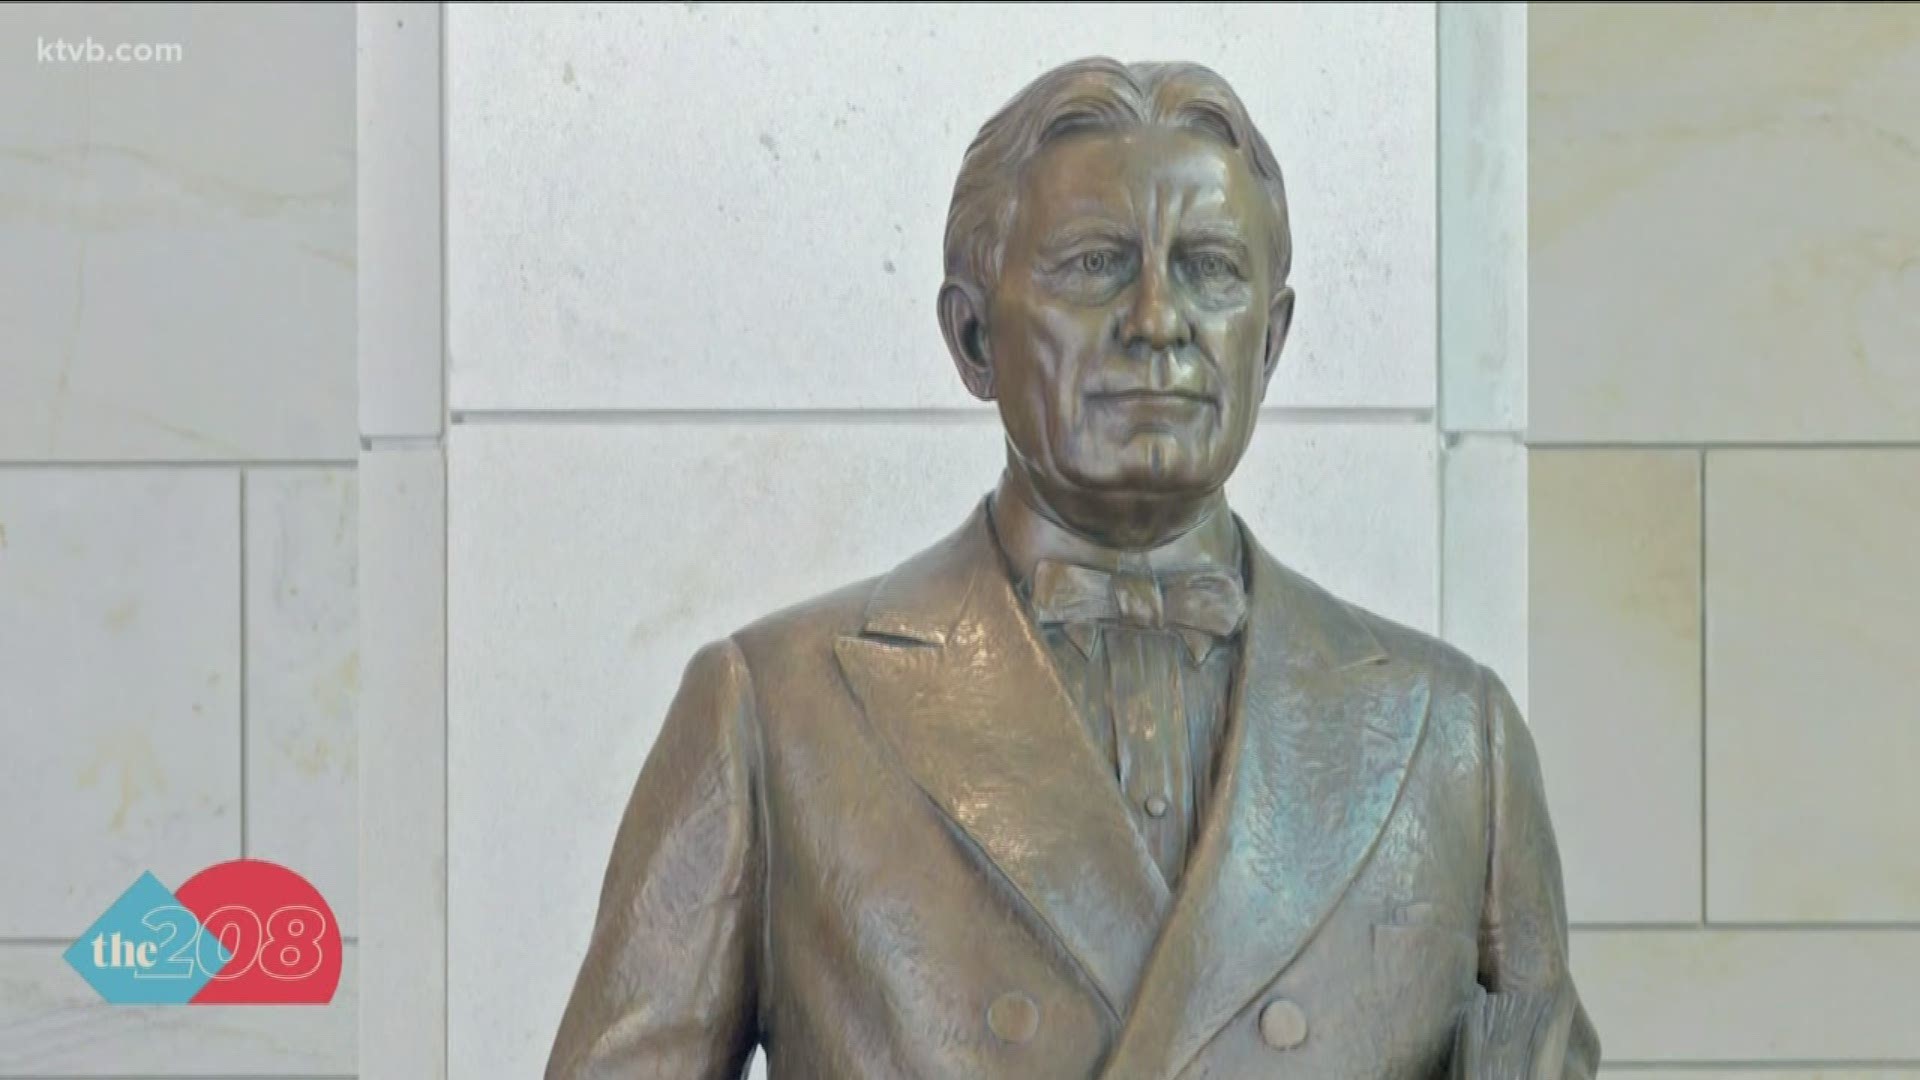 We spoke with an expert about the senator's vast contributions to the state's history.